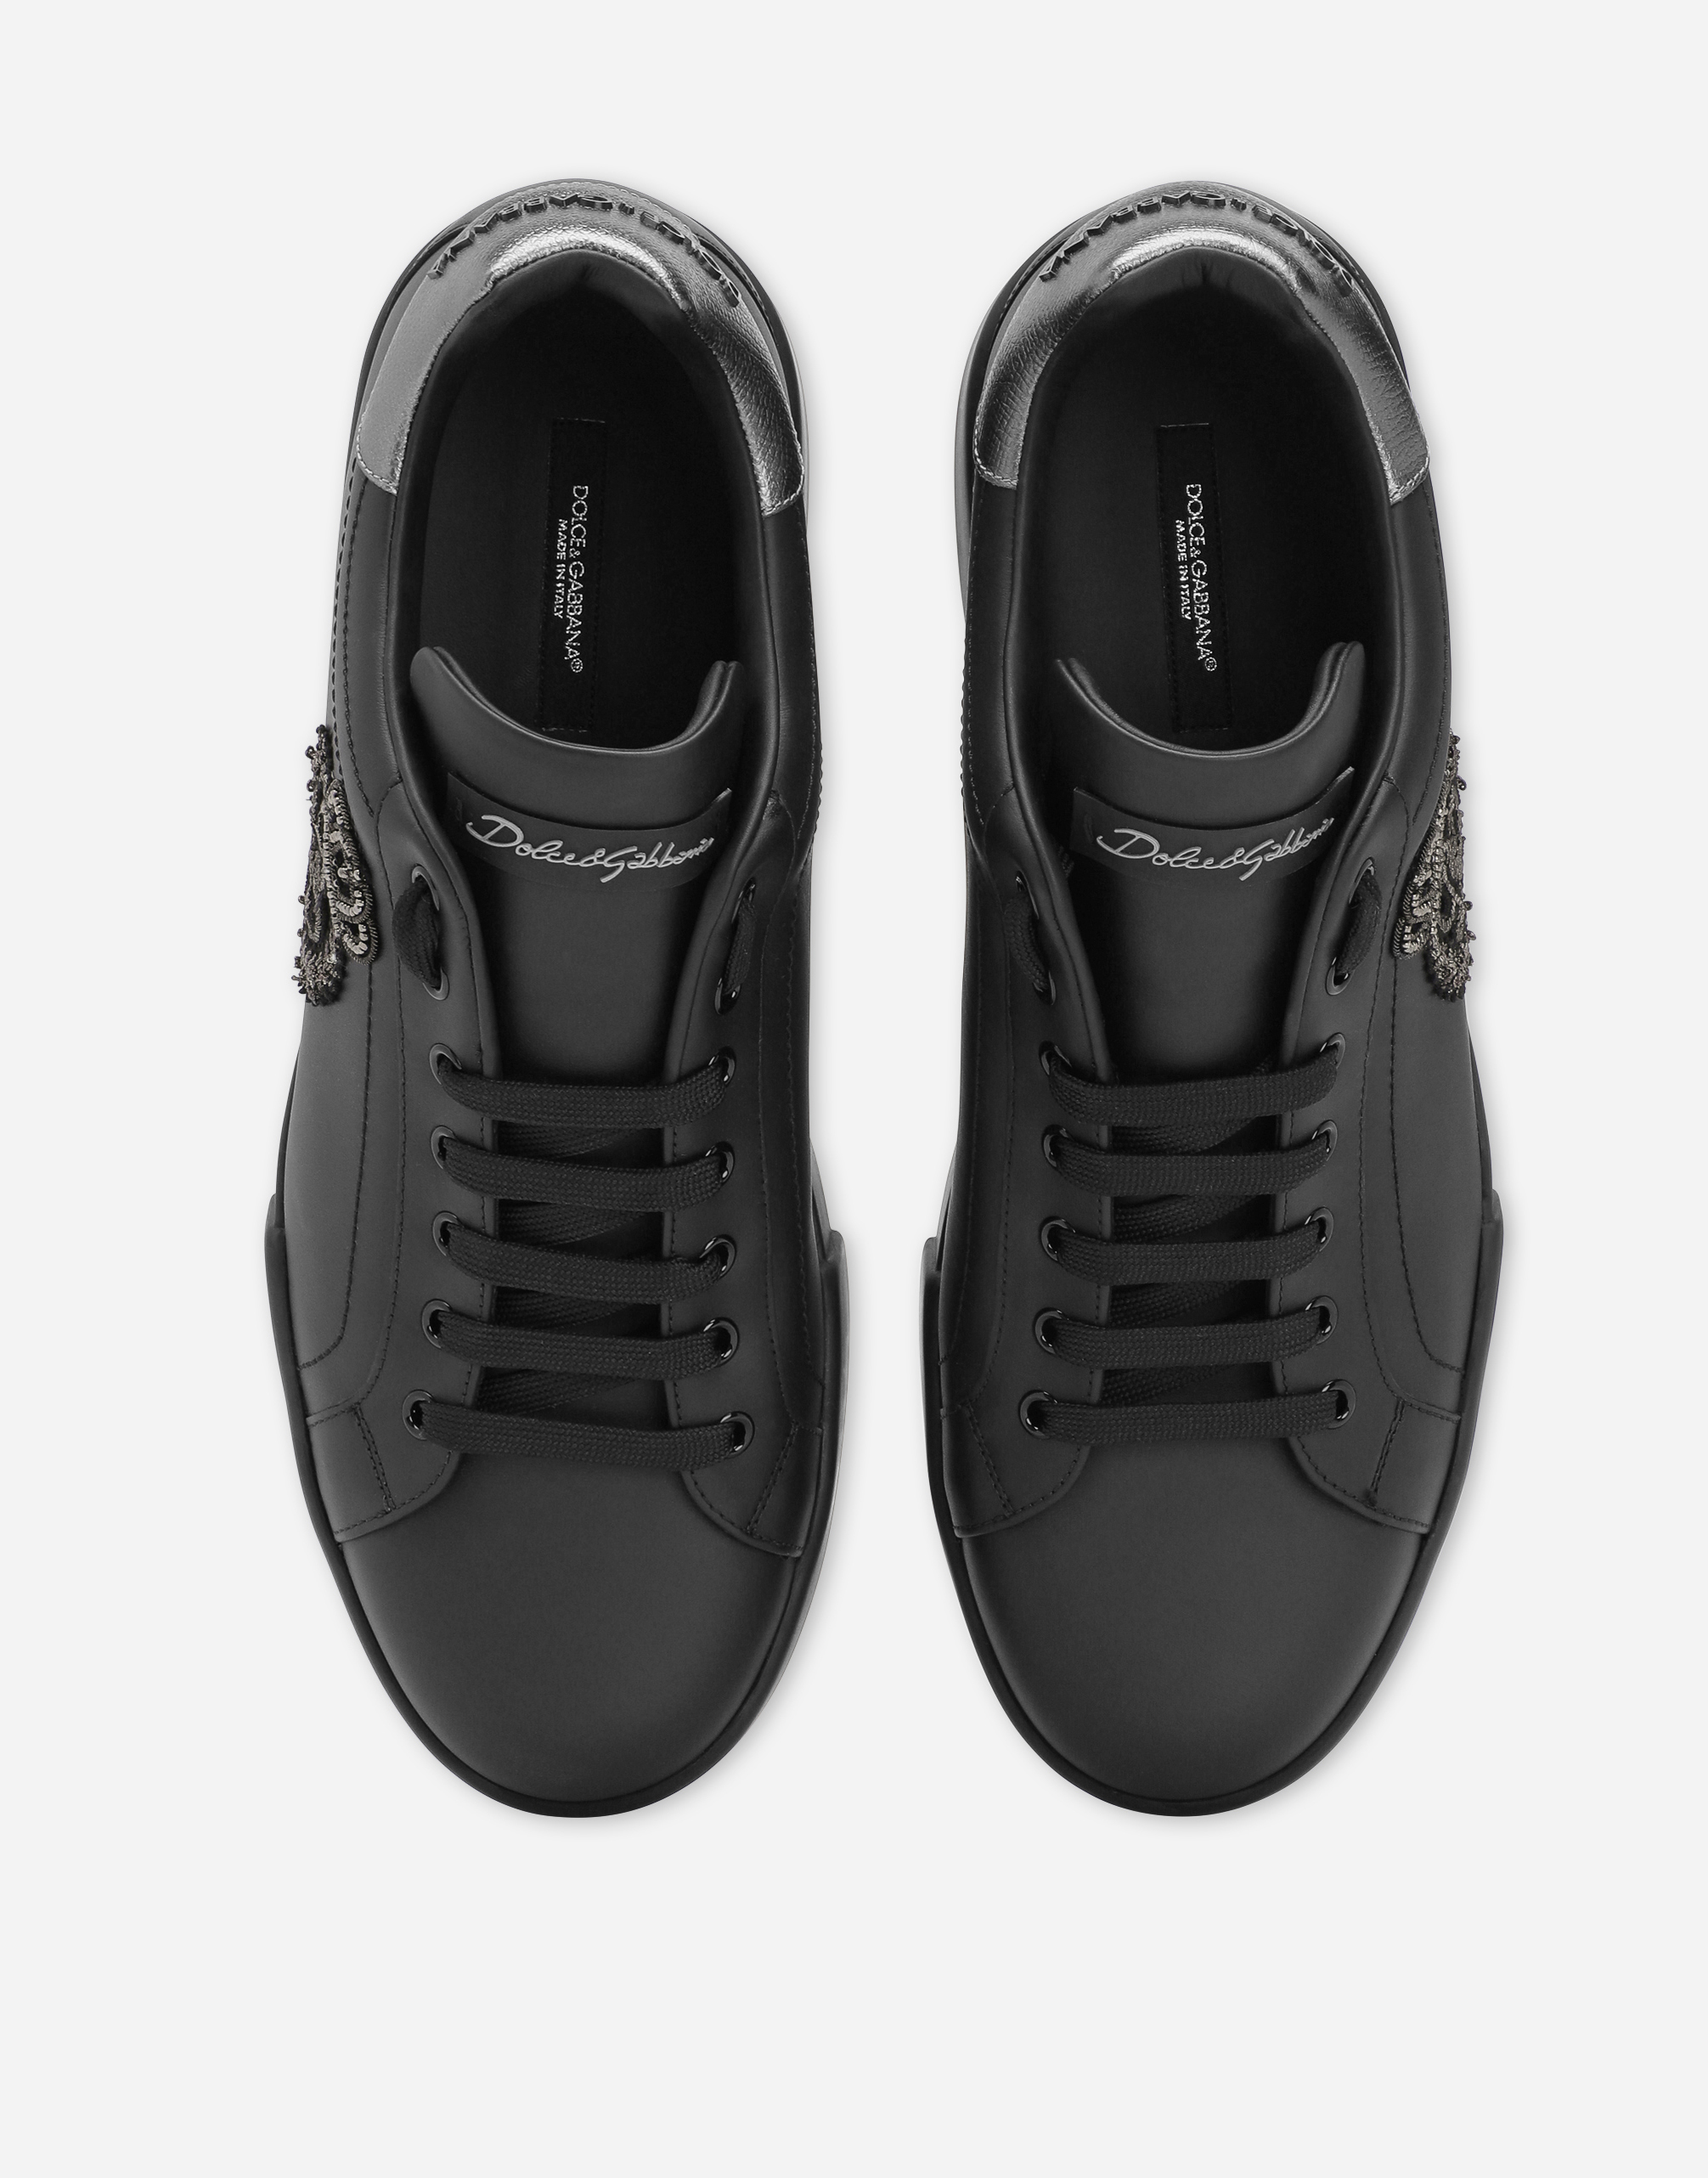 Calfskin nappa Portofino sneakers with crown patch